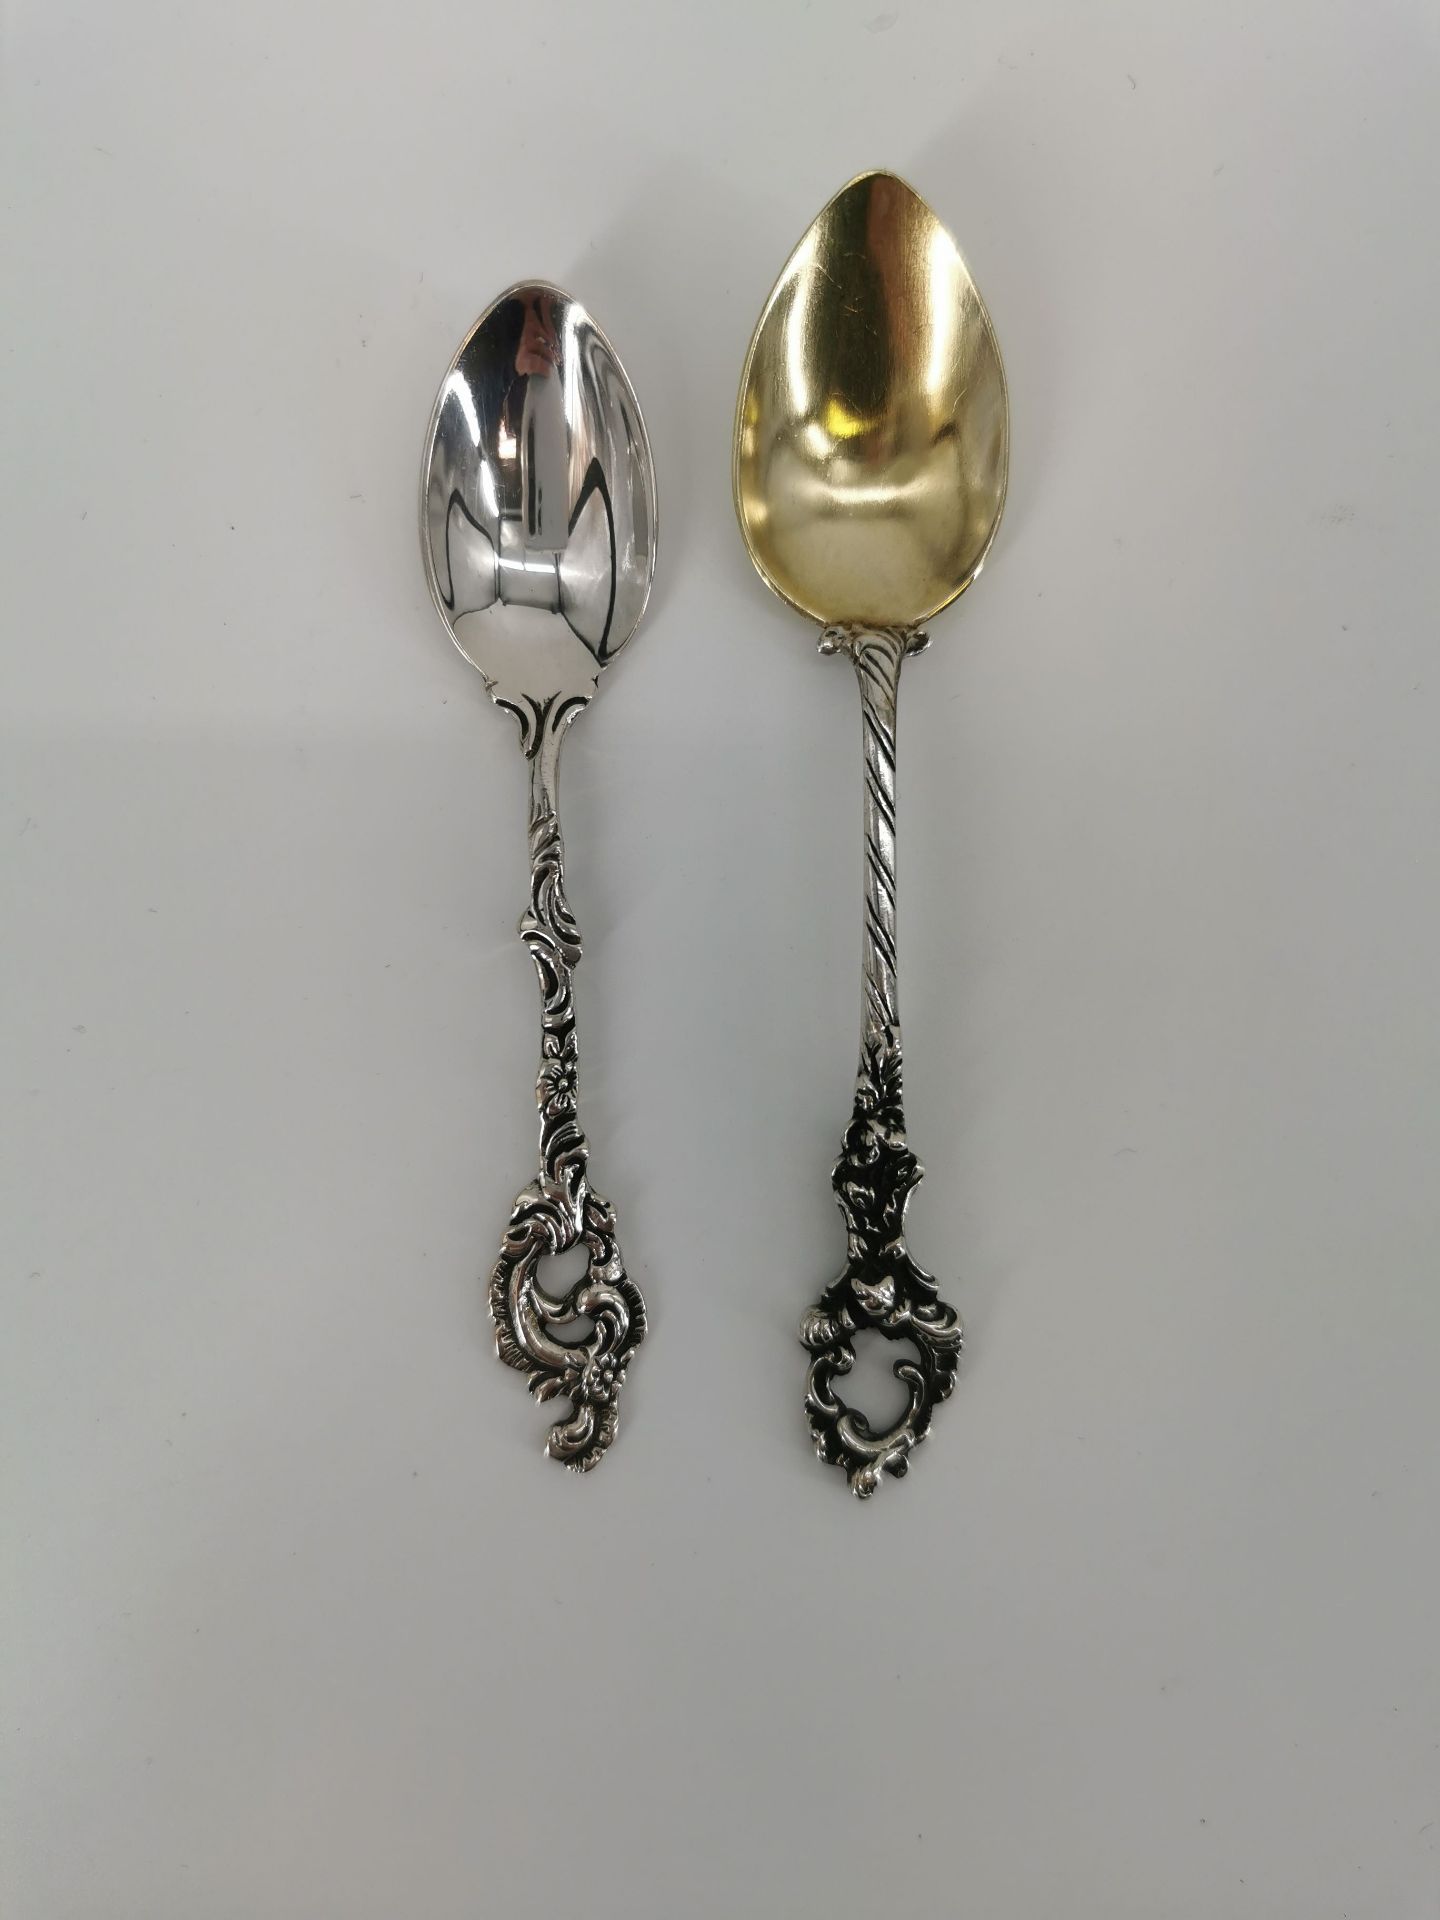 8 COFFEE SPOONS AND 4 MOCHA SPOONS - Image 2 of 3